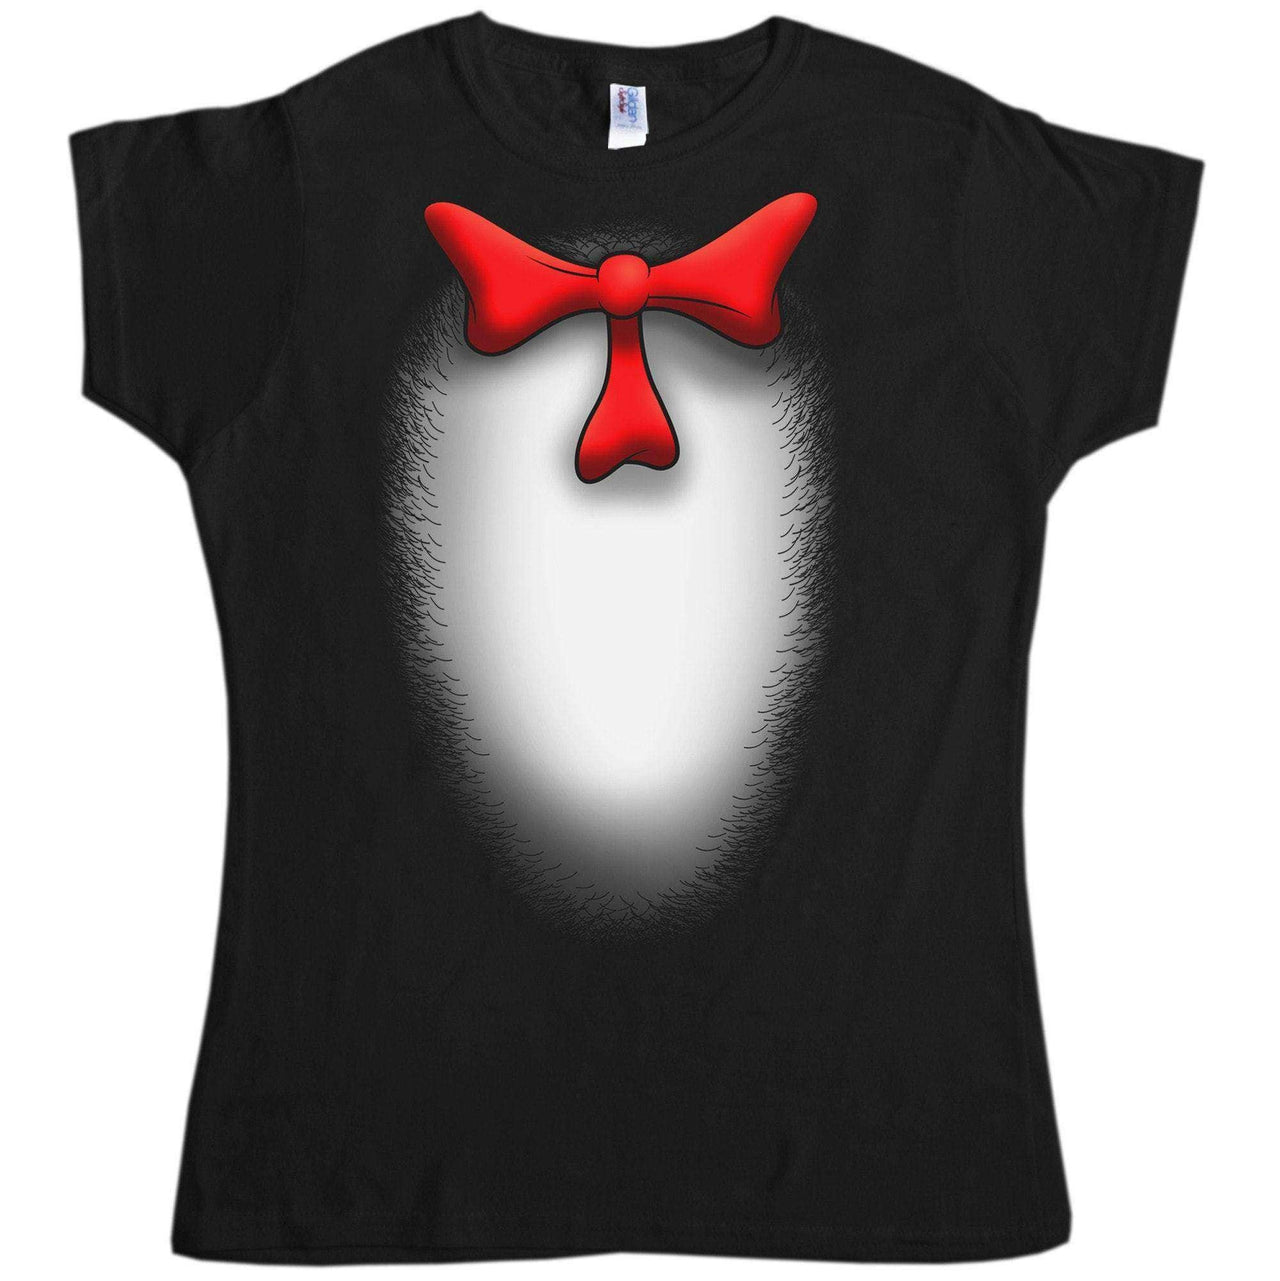 The Cat In The Hat T-Shirt for Women 8Ball